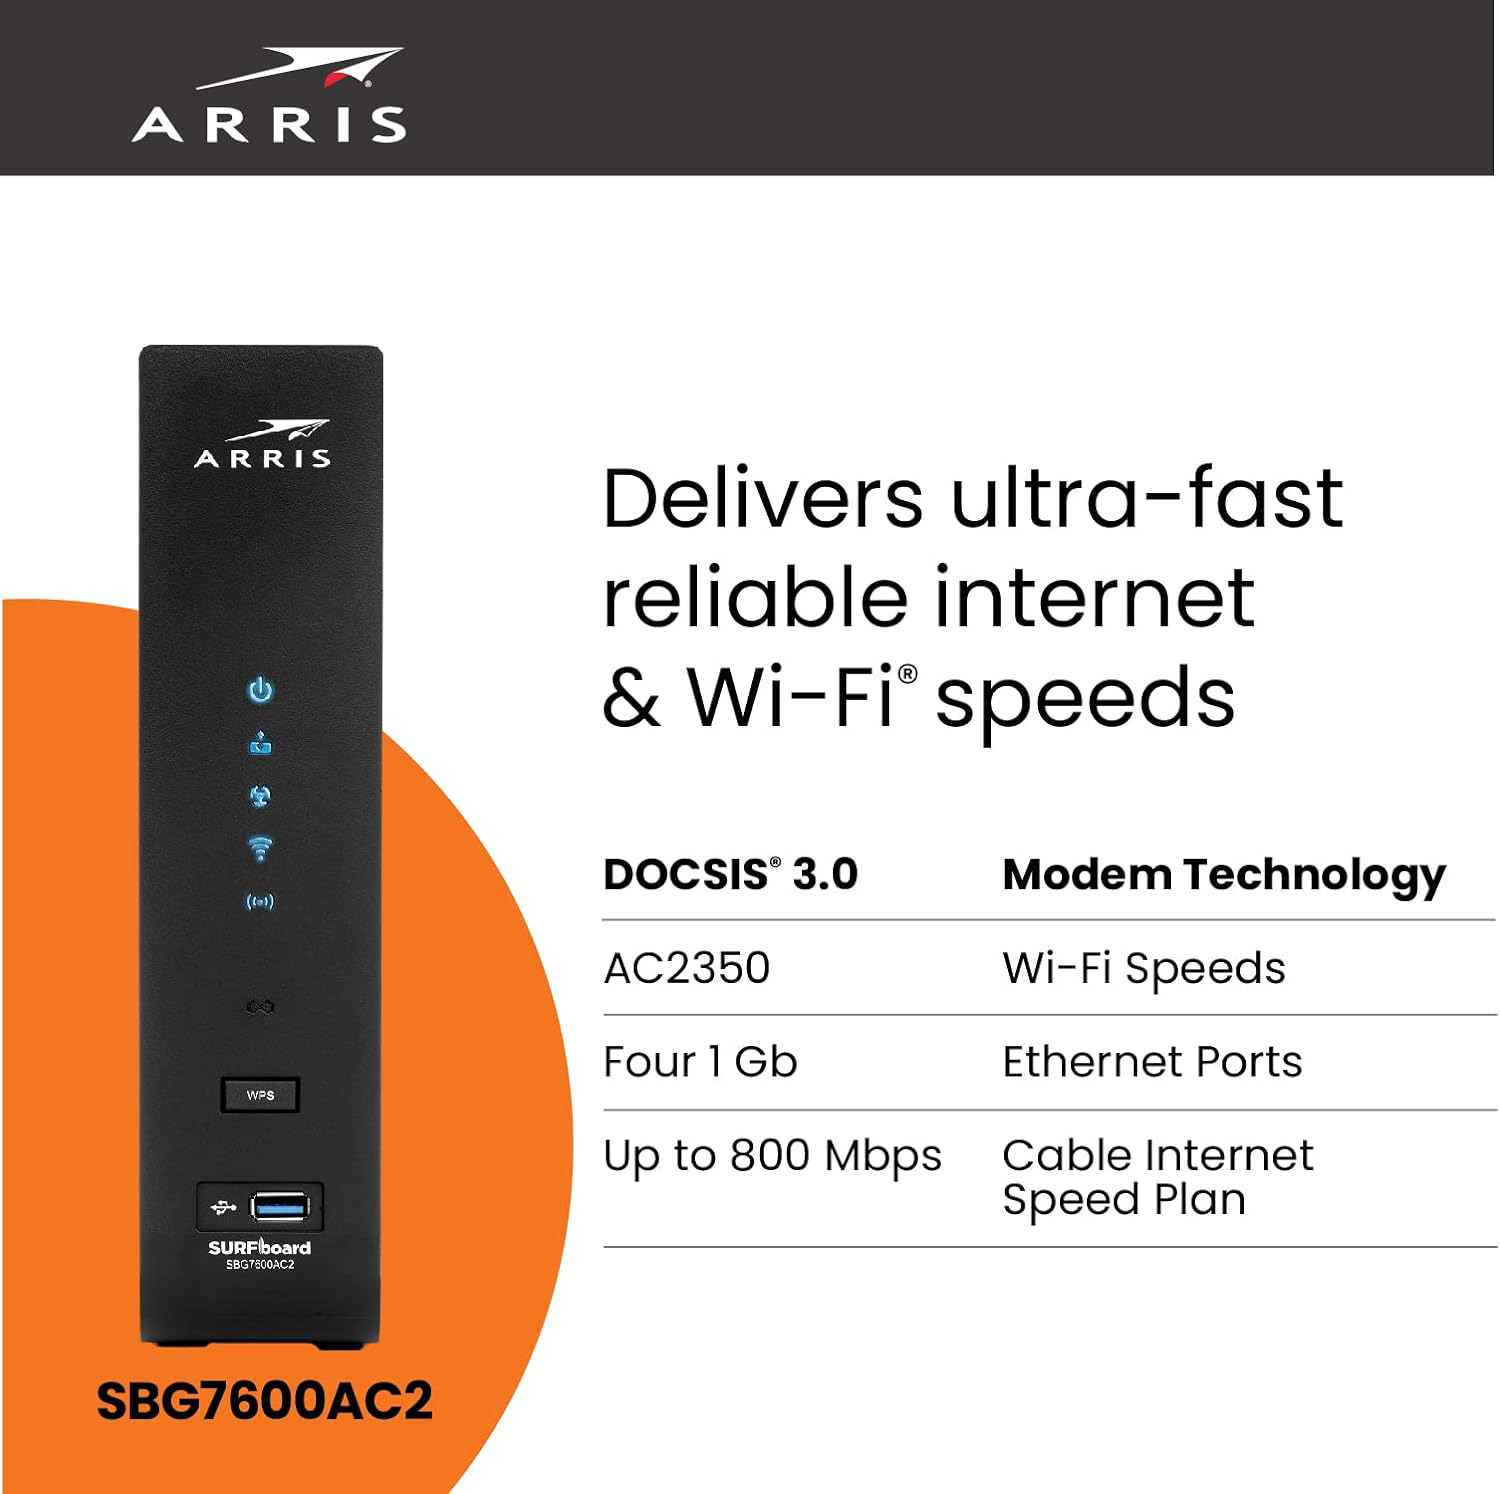 ARRIS SURFboard SBG7600AC2 DOCSIS 3.0 Cable Modem & AC2350 Wi-Fi Router | Approv